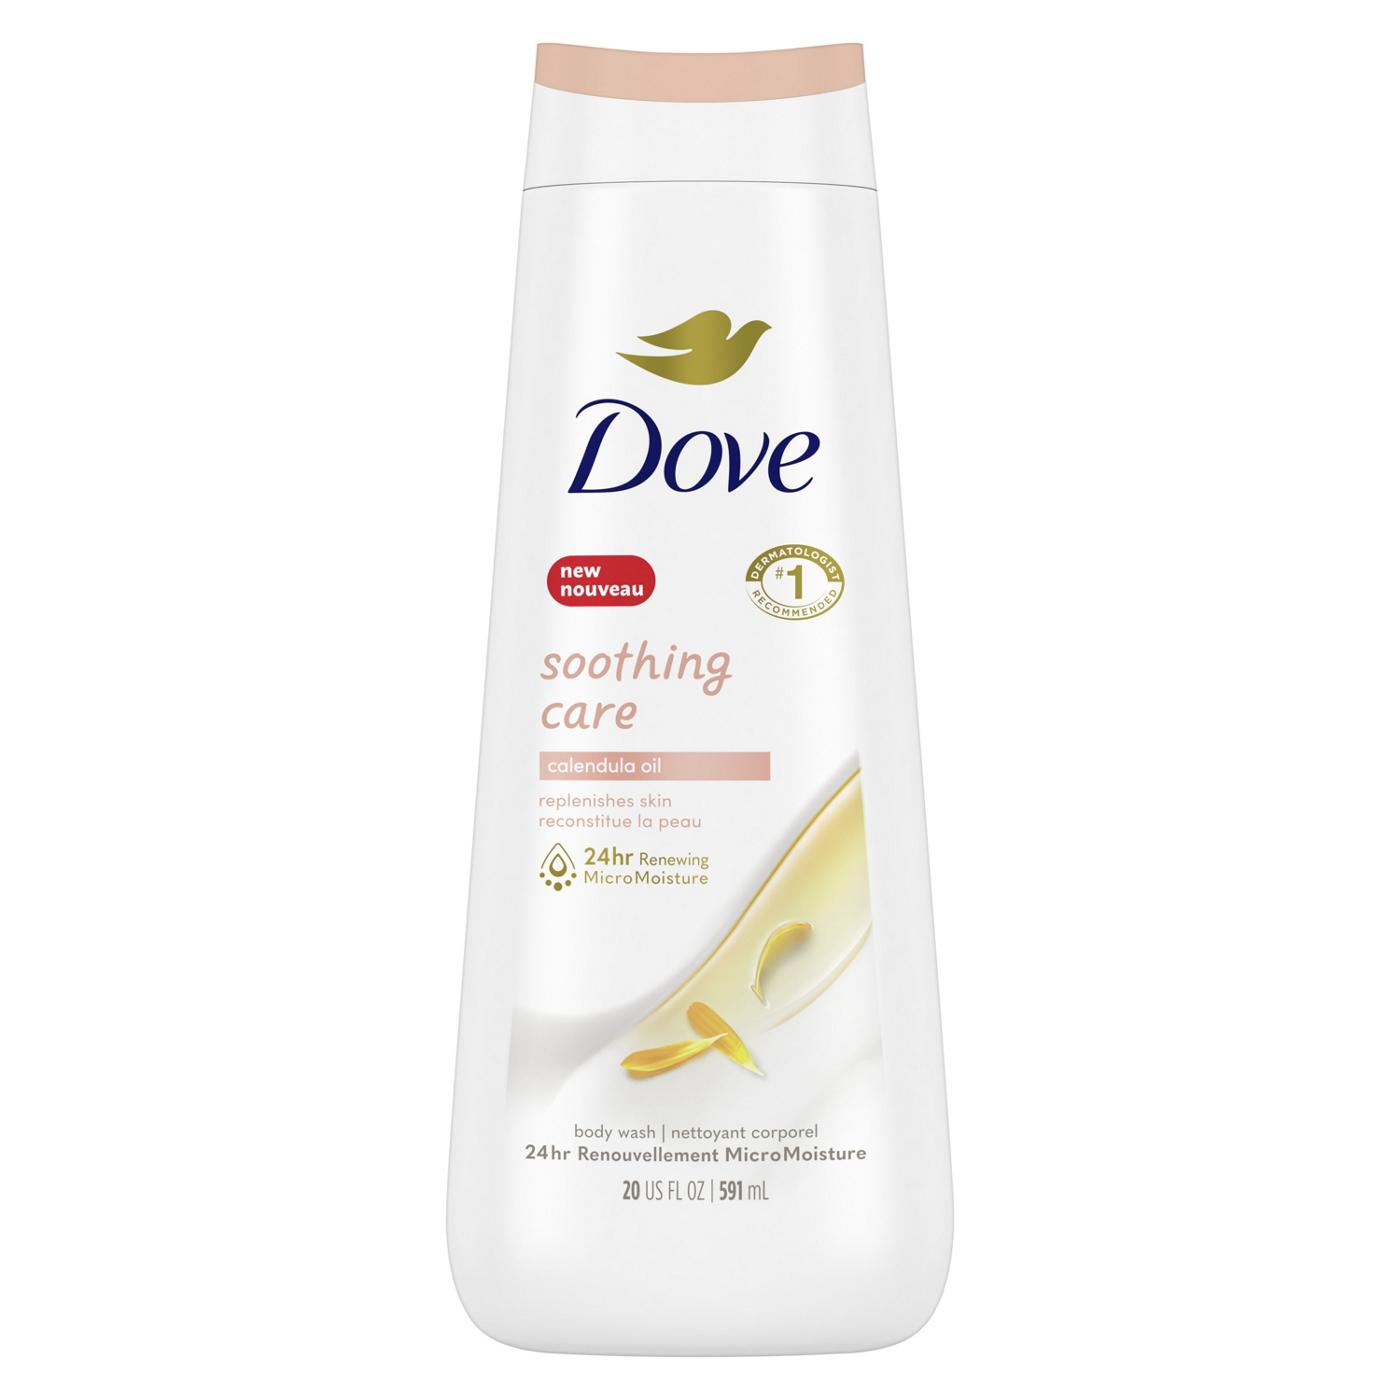 Dove Soothing Care Body Wash - Calendula Oil; image 1 of 8